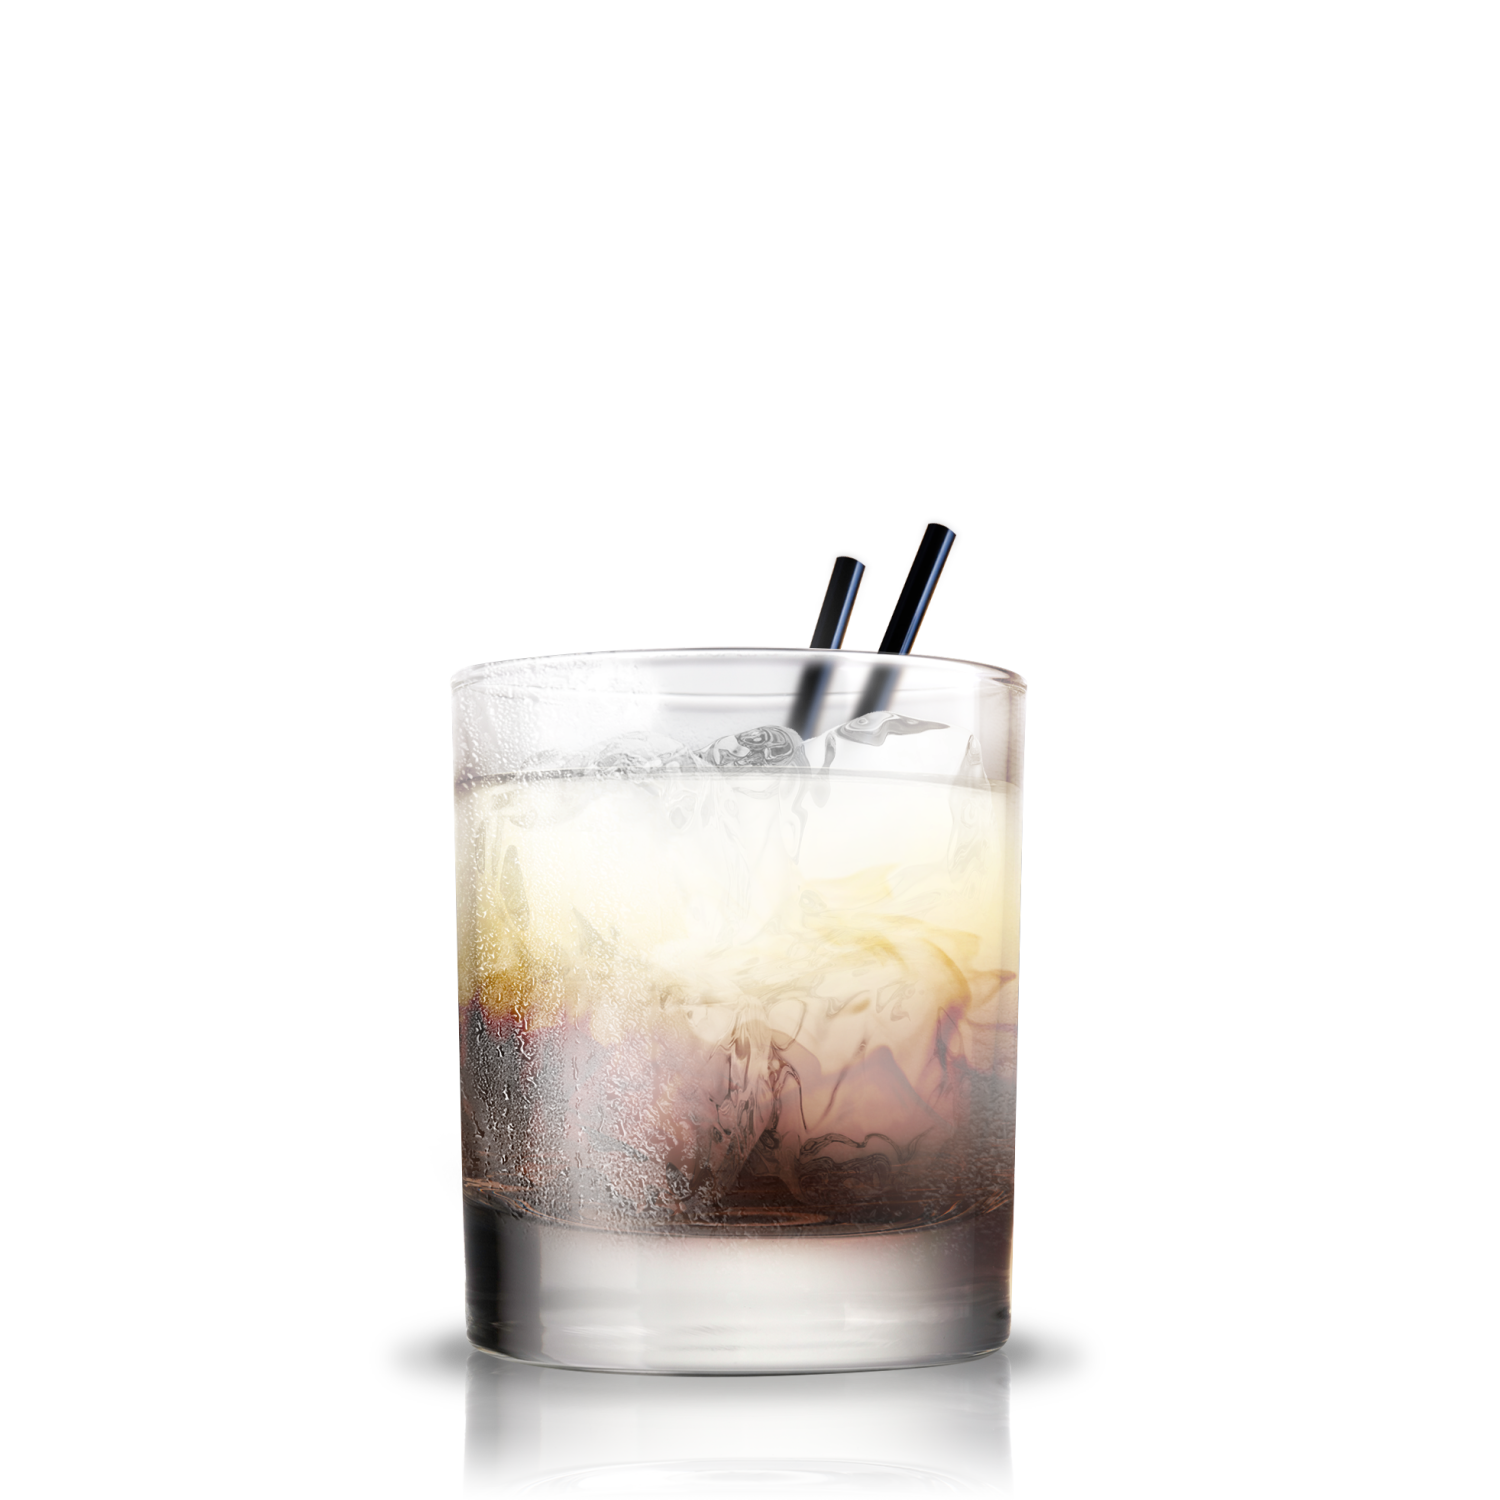 cocktail clipart white russian